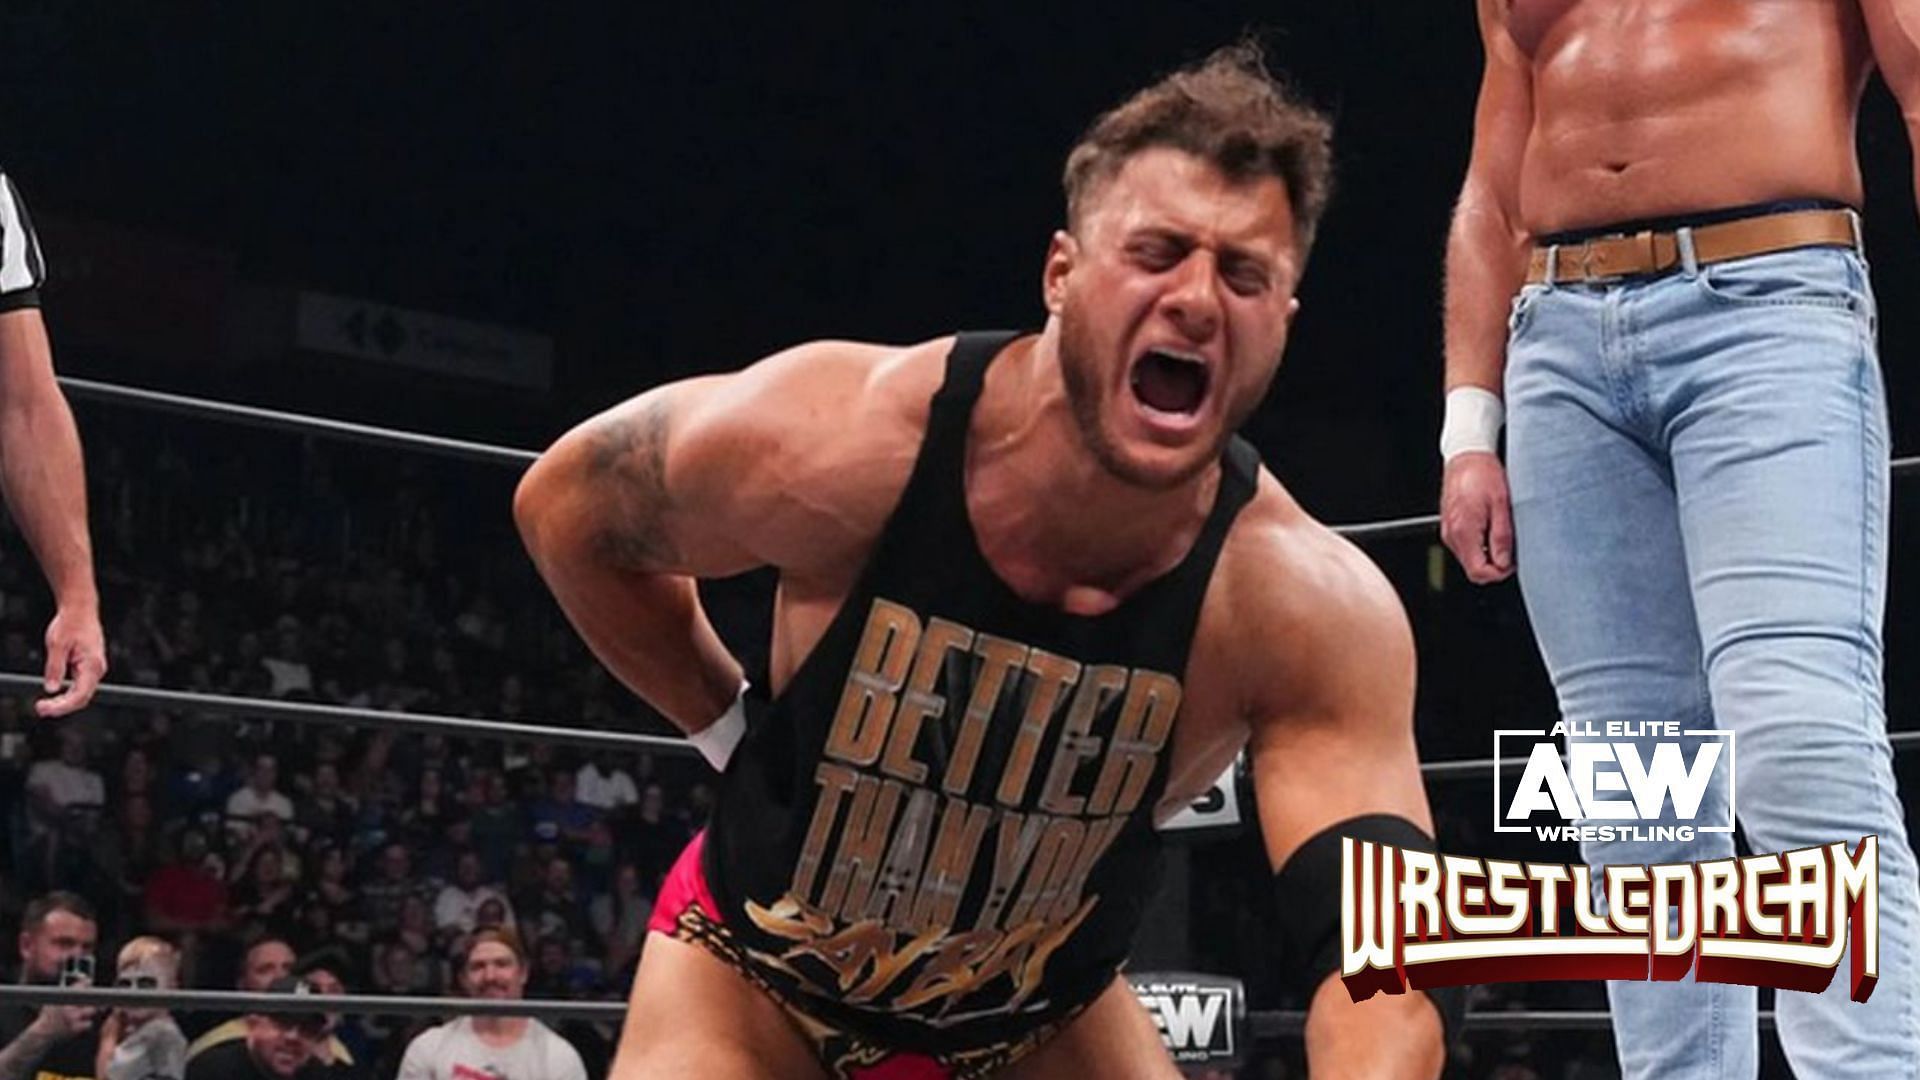 MJF defended the ROH Tag Titles at WrestleDream